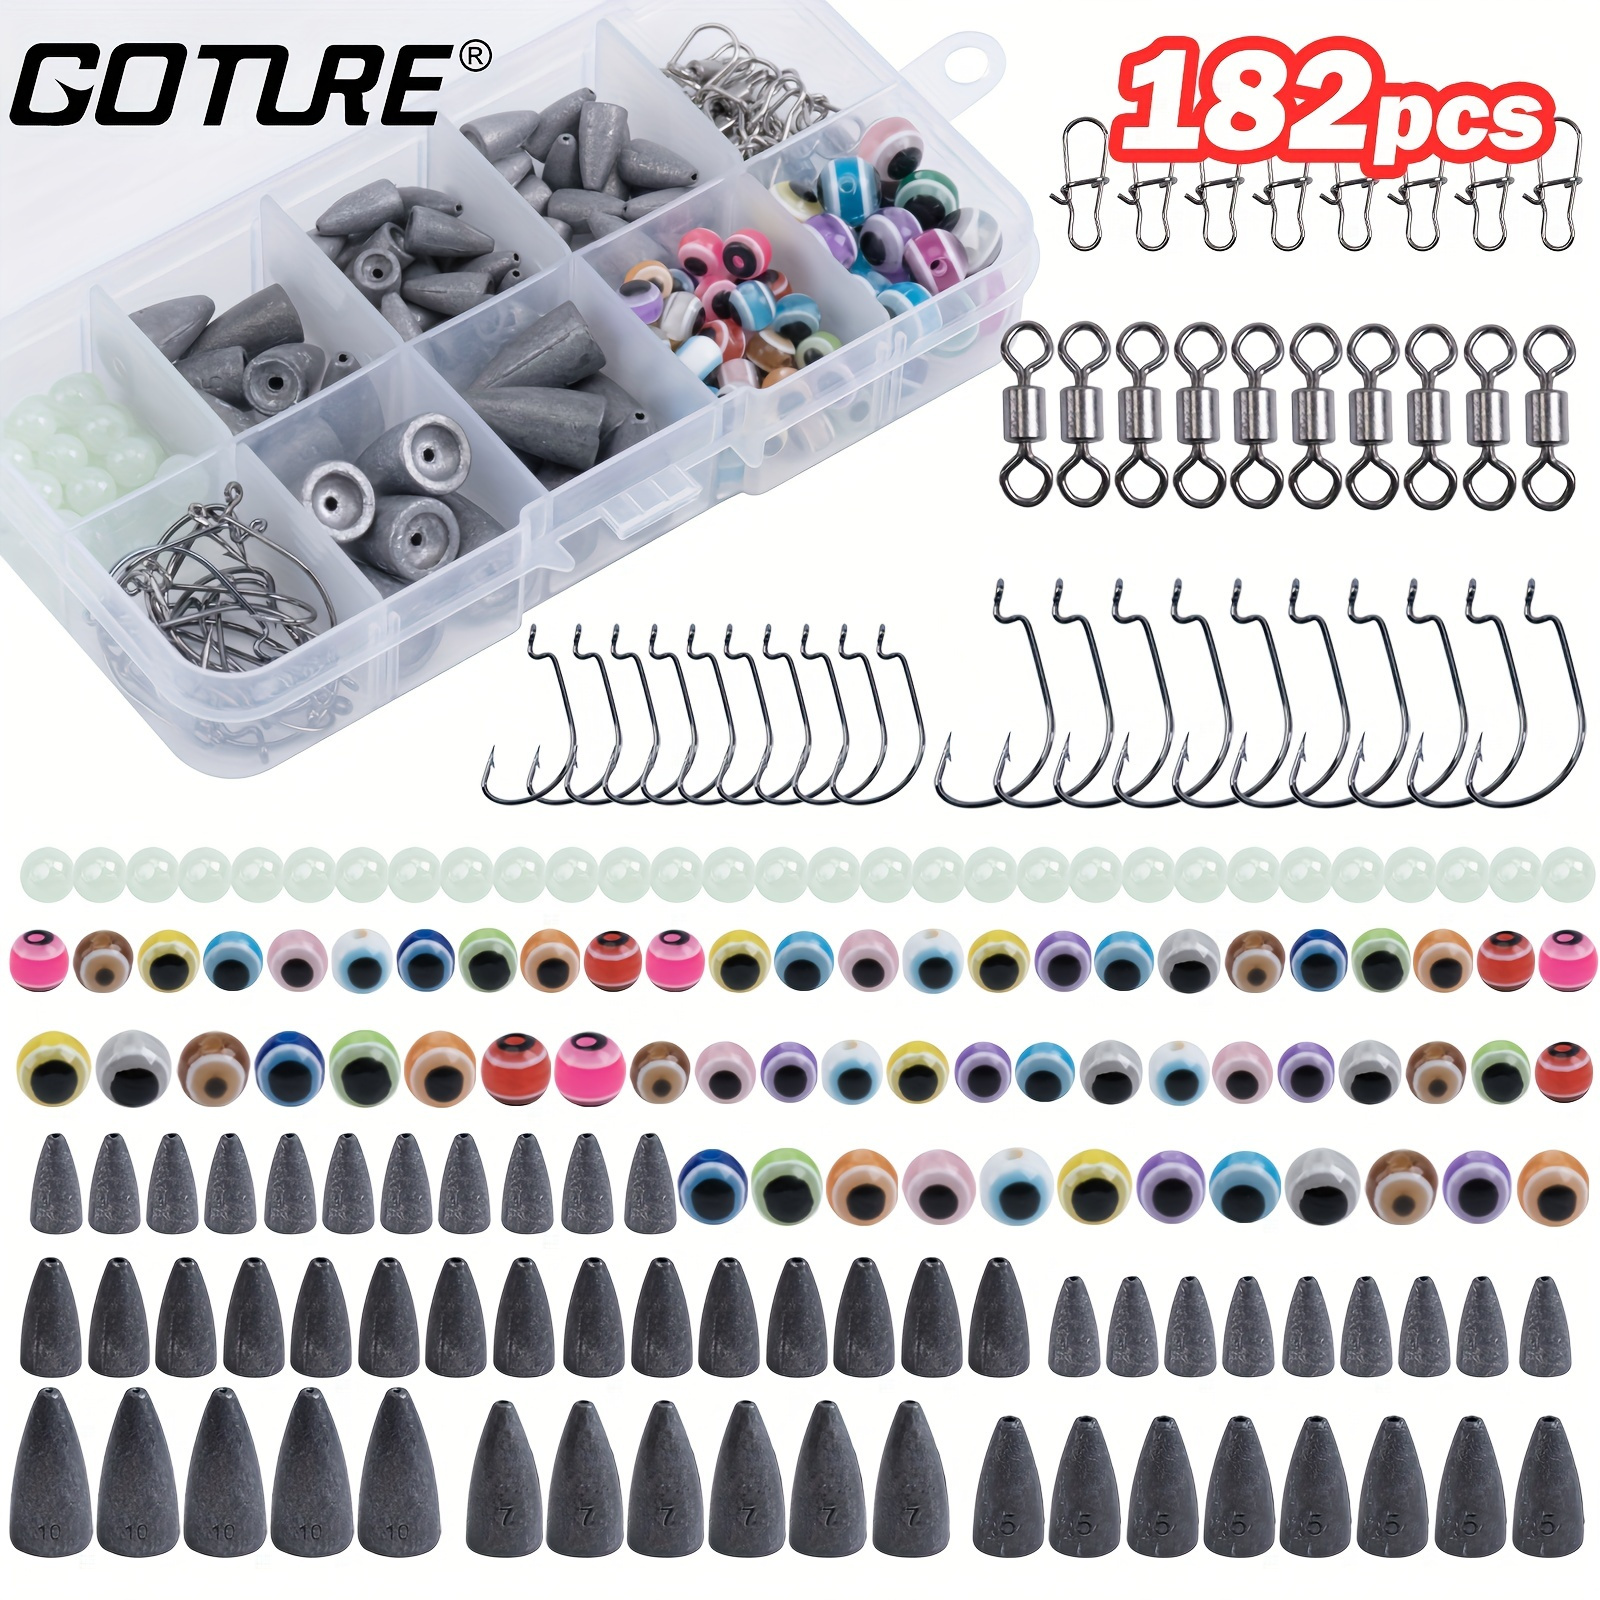 

Goture 182pcs Fishing Tackle Group, Including Fishing Weights Sinkers Lure, Fishing Beads Bullet Sinkers, Fishing Accessories Kit